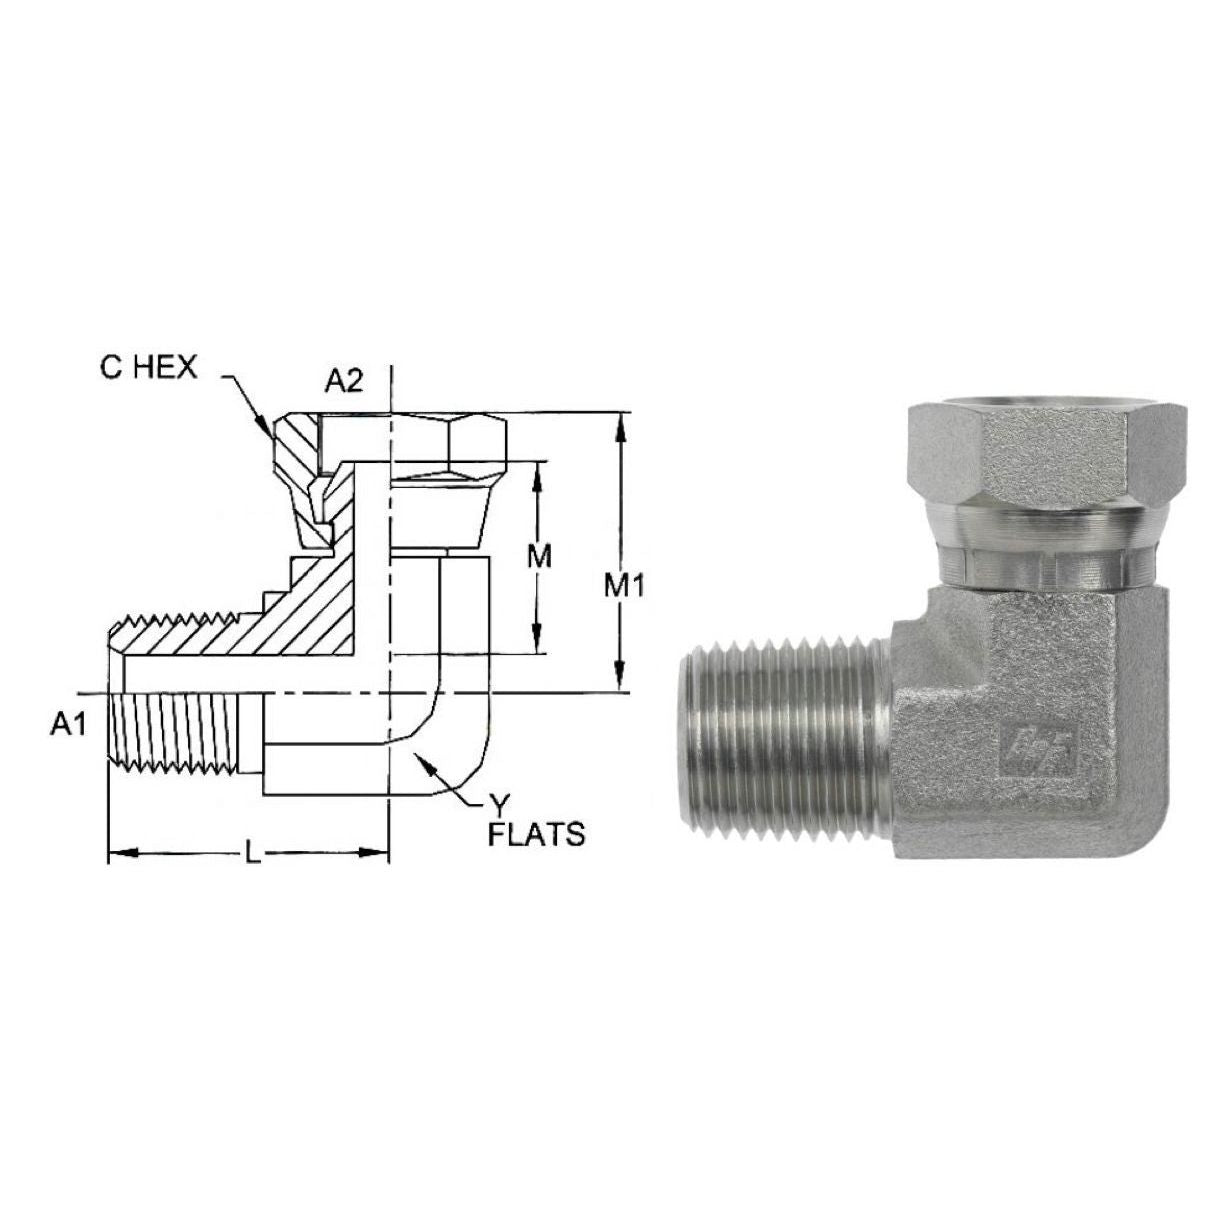 1501-16-16-SS : OneHydraulics 90-Degree Elbow, 1 Male NPT x 1 Female NPT Swivel, Stainless Steel, 2400psi